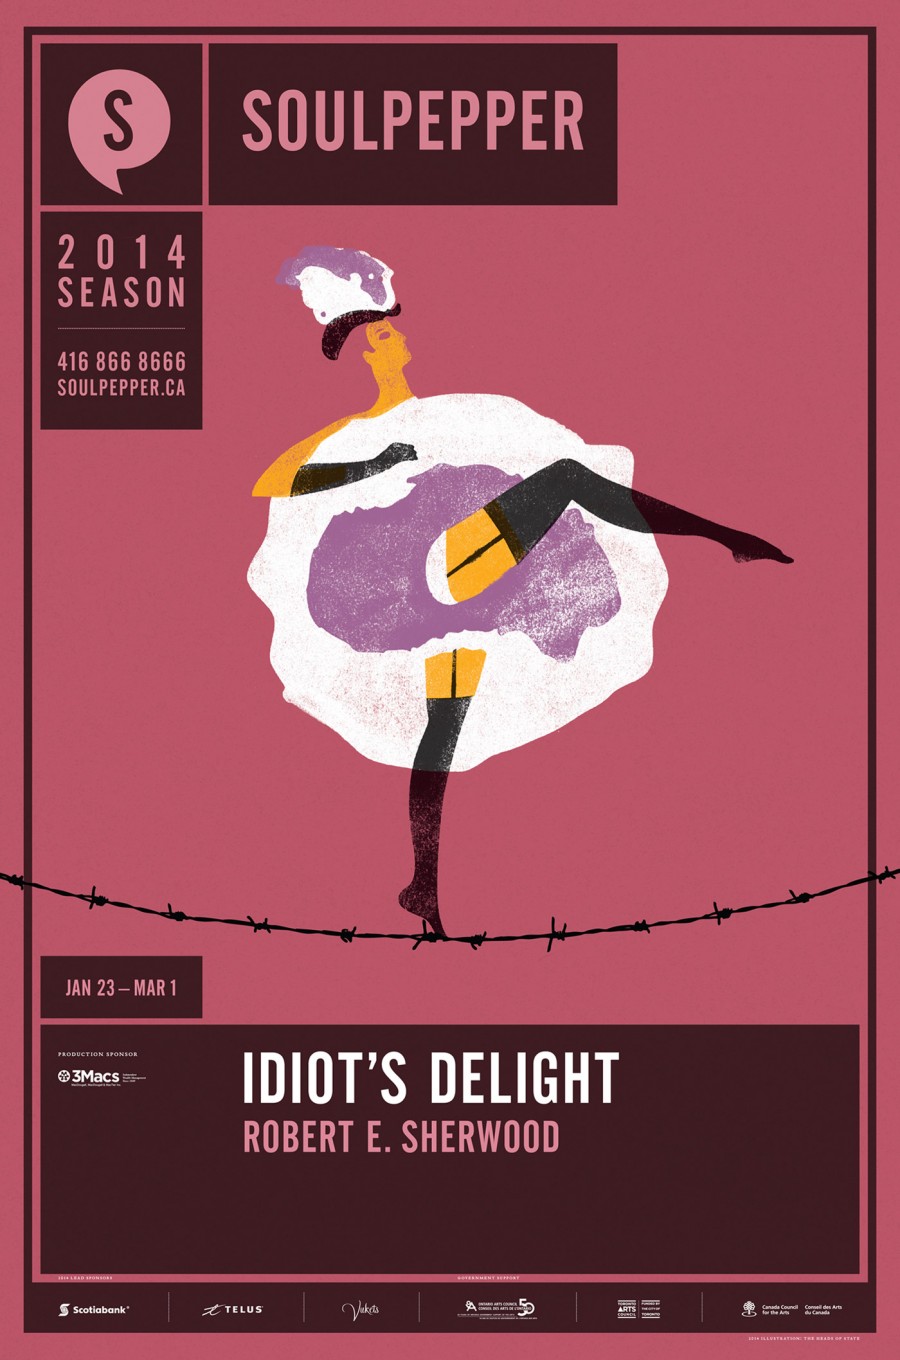 Idiot's Delight - Soulpepper Theatre - 2014 Season Poster Series - The Heads of State